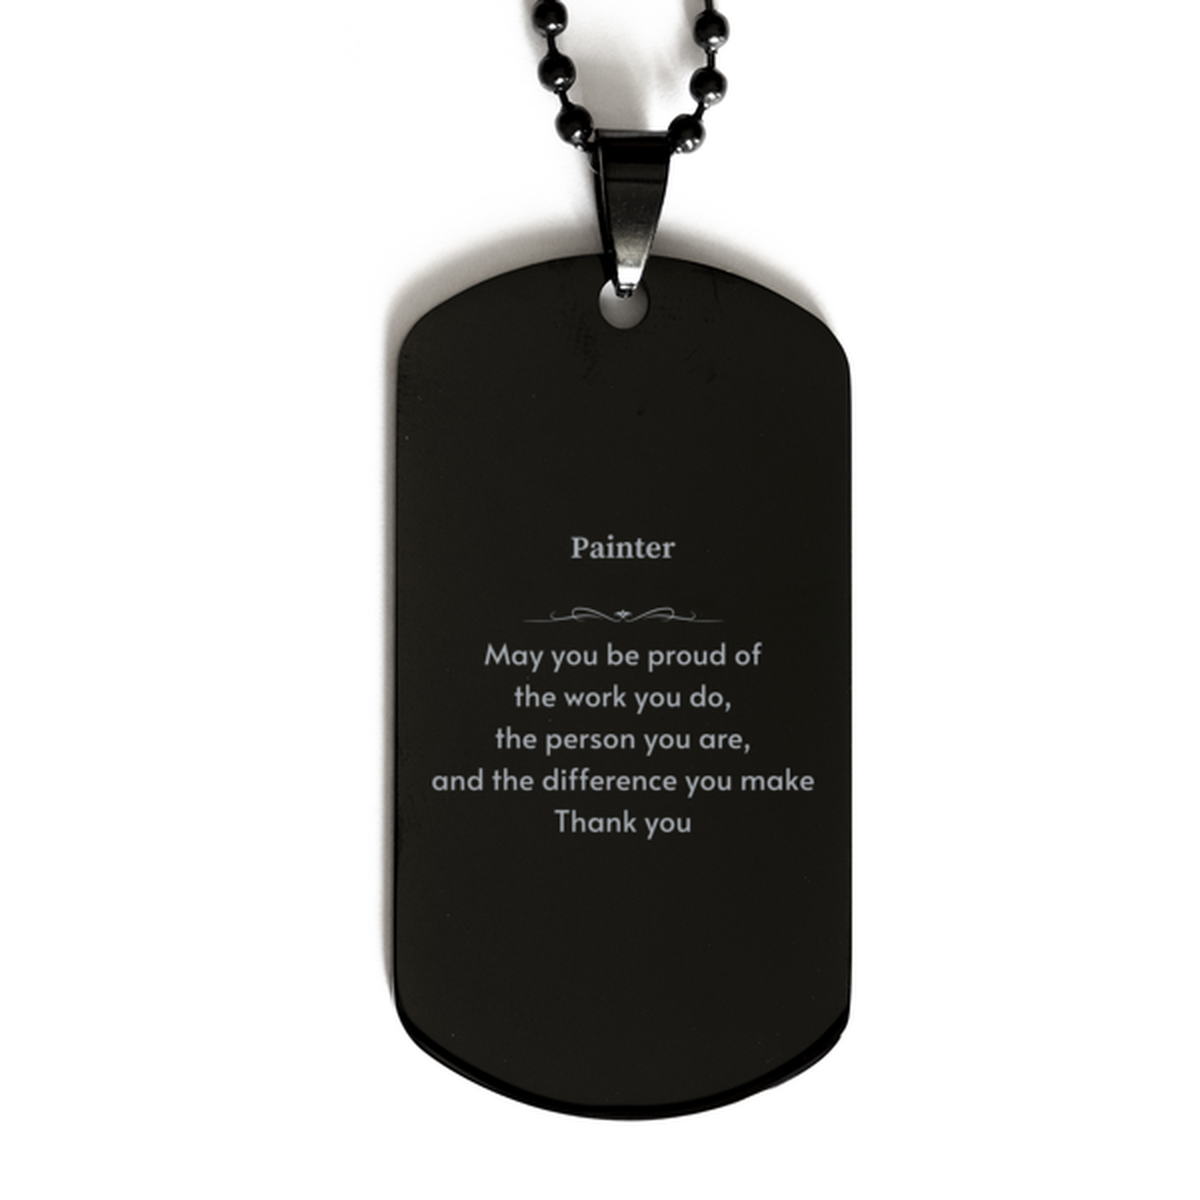 Heartwarming Black Dog Tag Retirement Coworkers Gifts for Painter, Painter May You be proud of the work you do, the person you are Gifts for Boss Men Women Friends